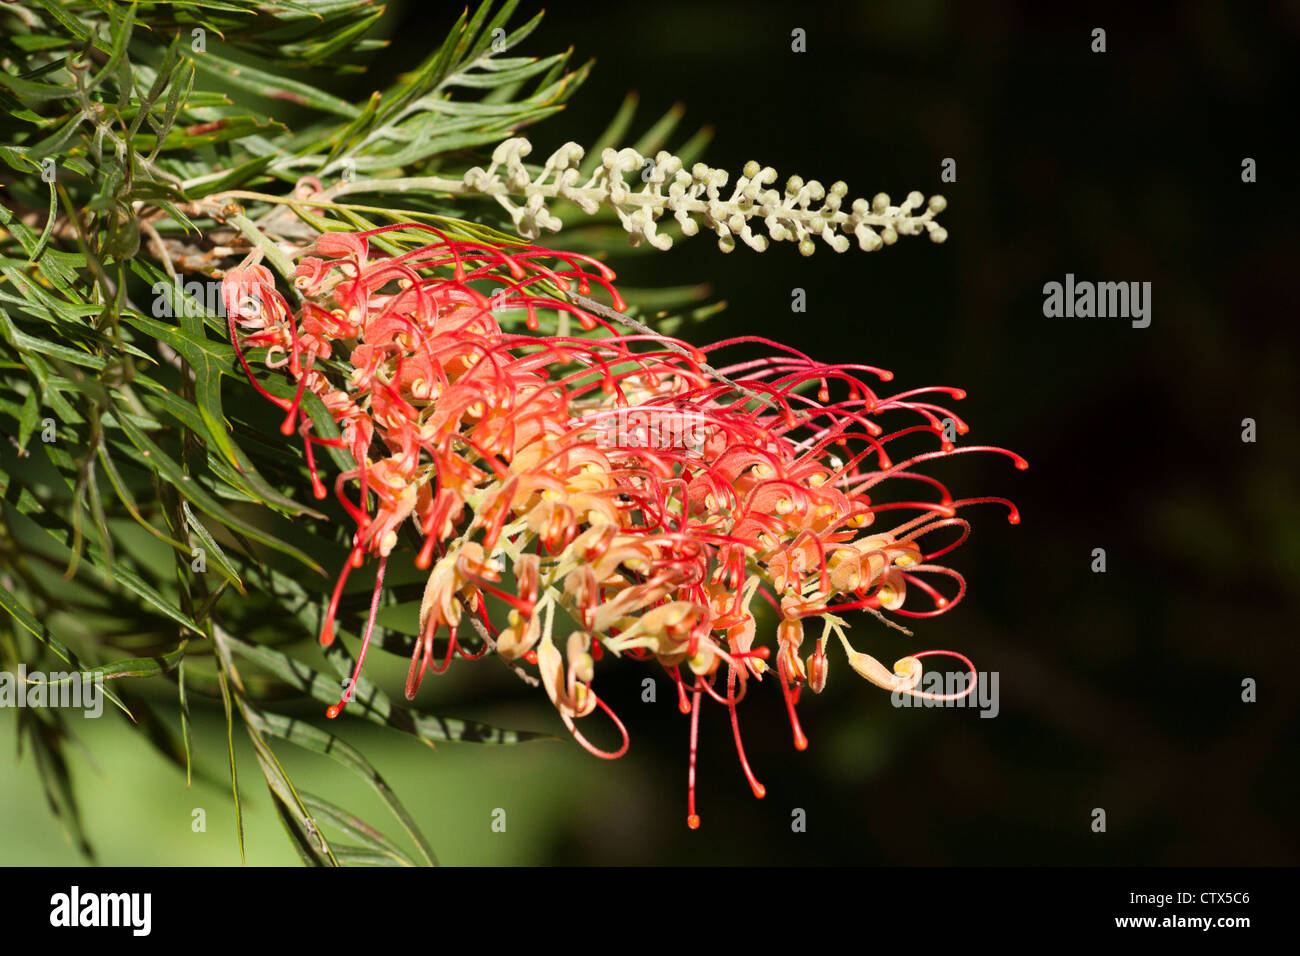 Bright red and yellow flower and buds of an Australian native Grevillea cultivar 'Superb' Stock Photo